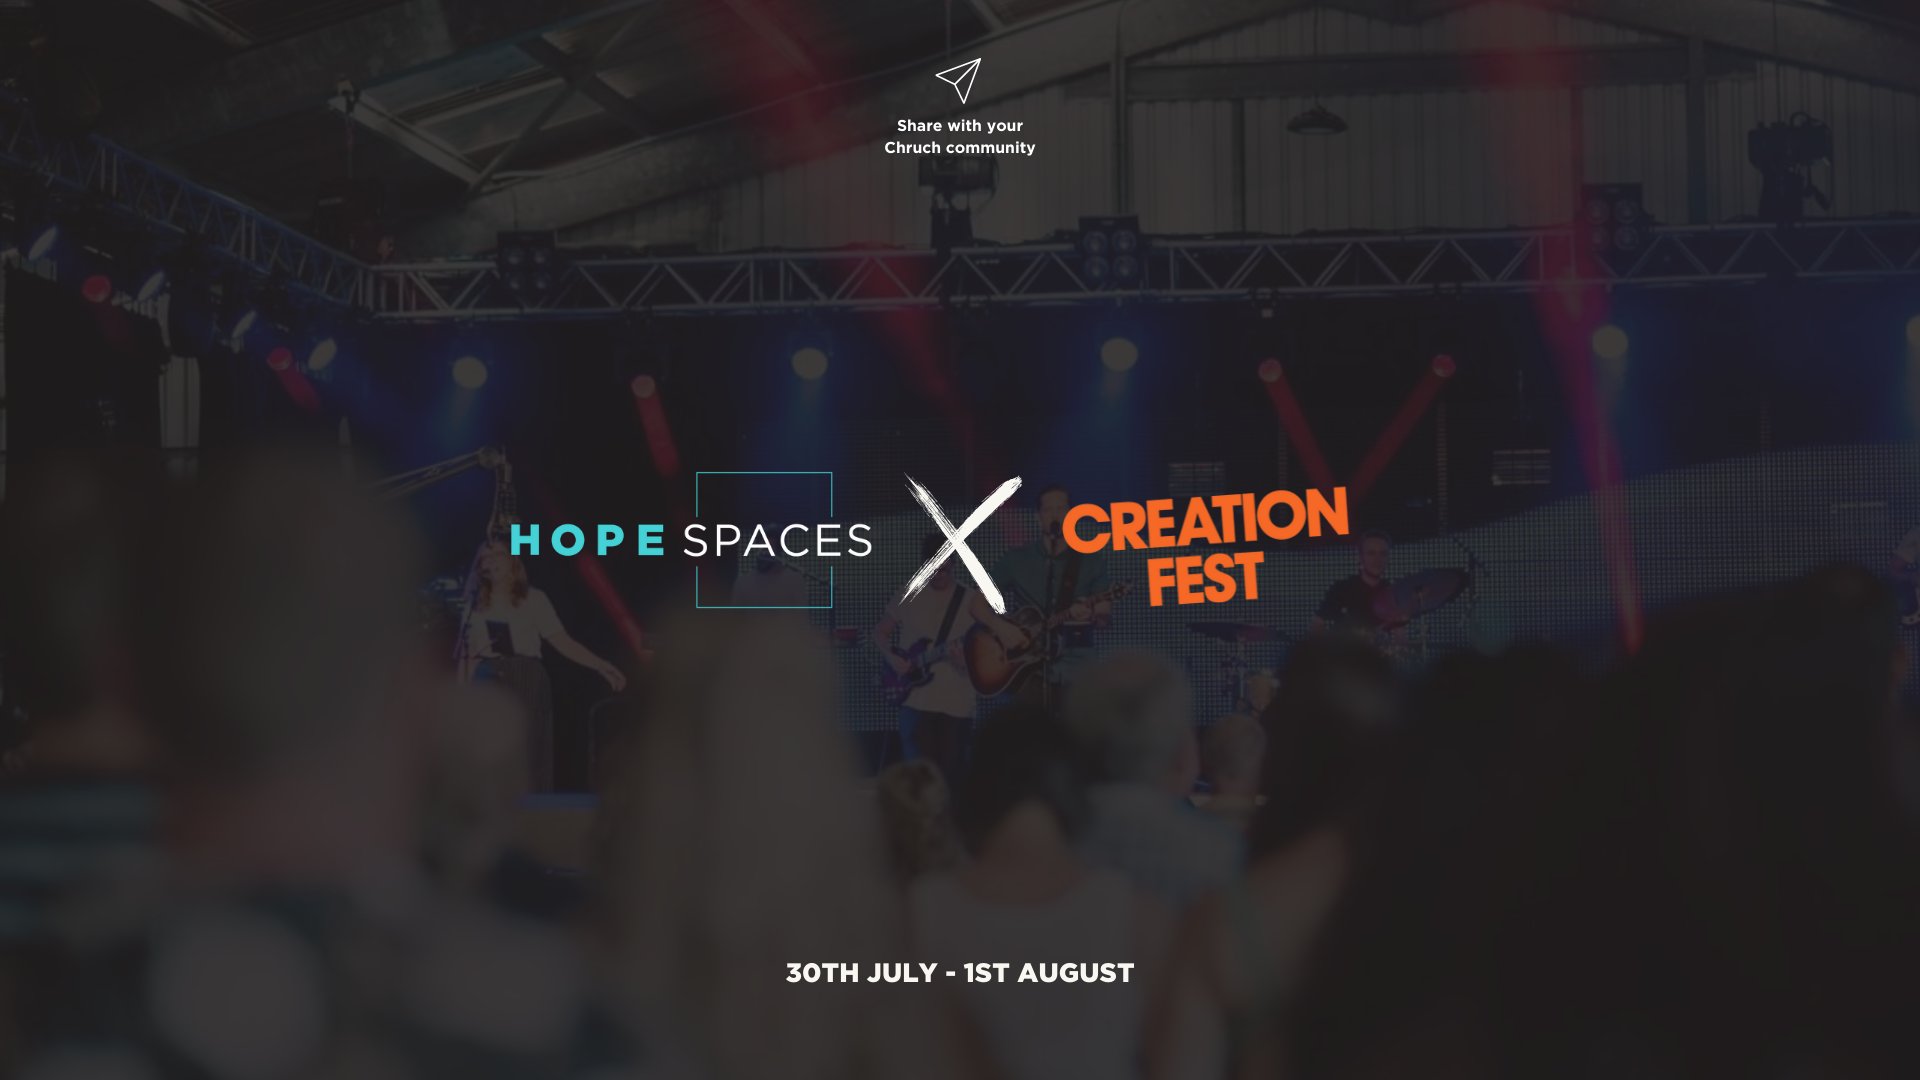 Hope spaces and Creation fest